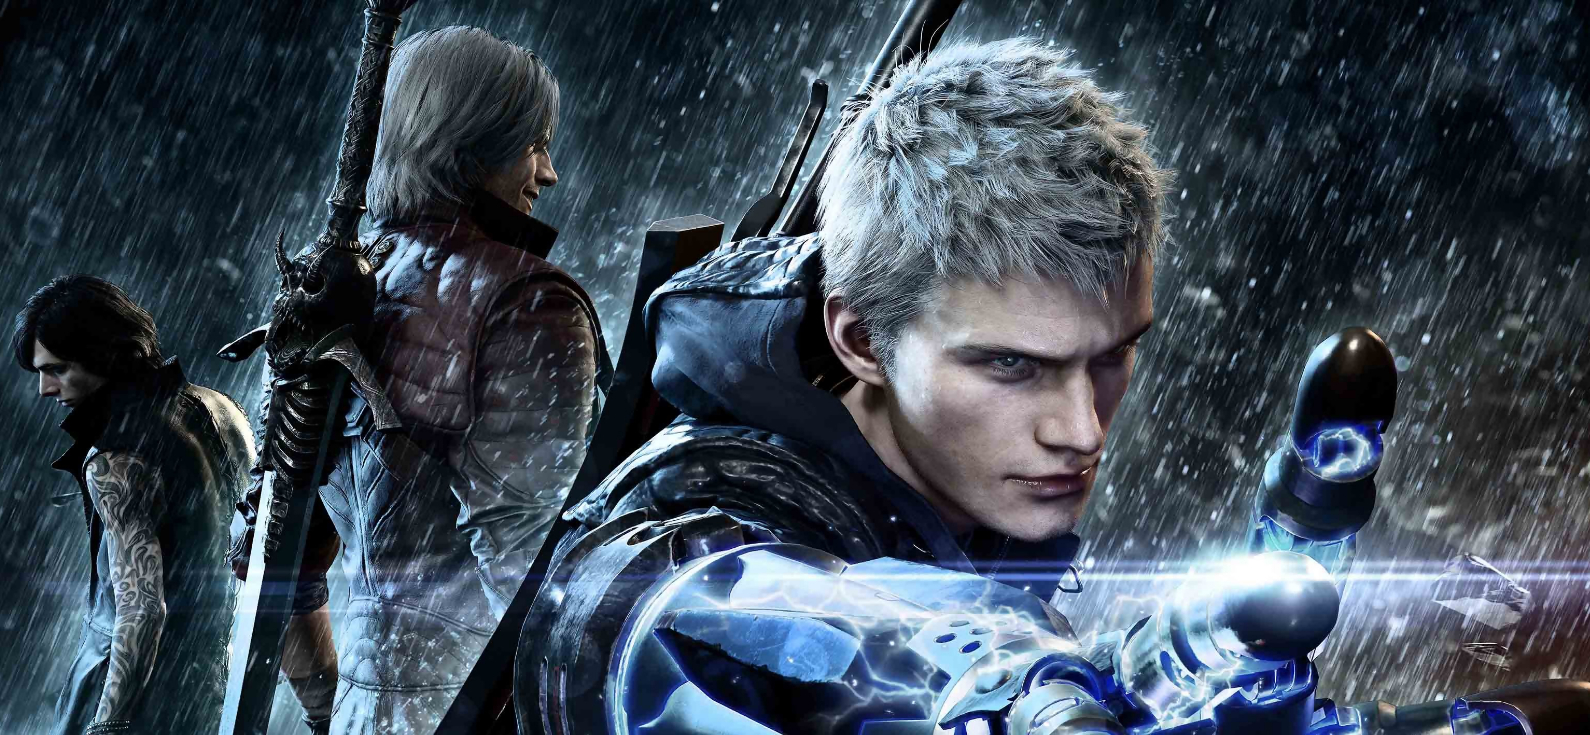 15 gaming franchises past their prime - Devil May Cry